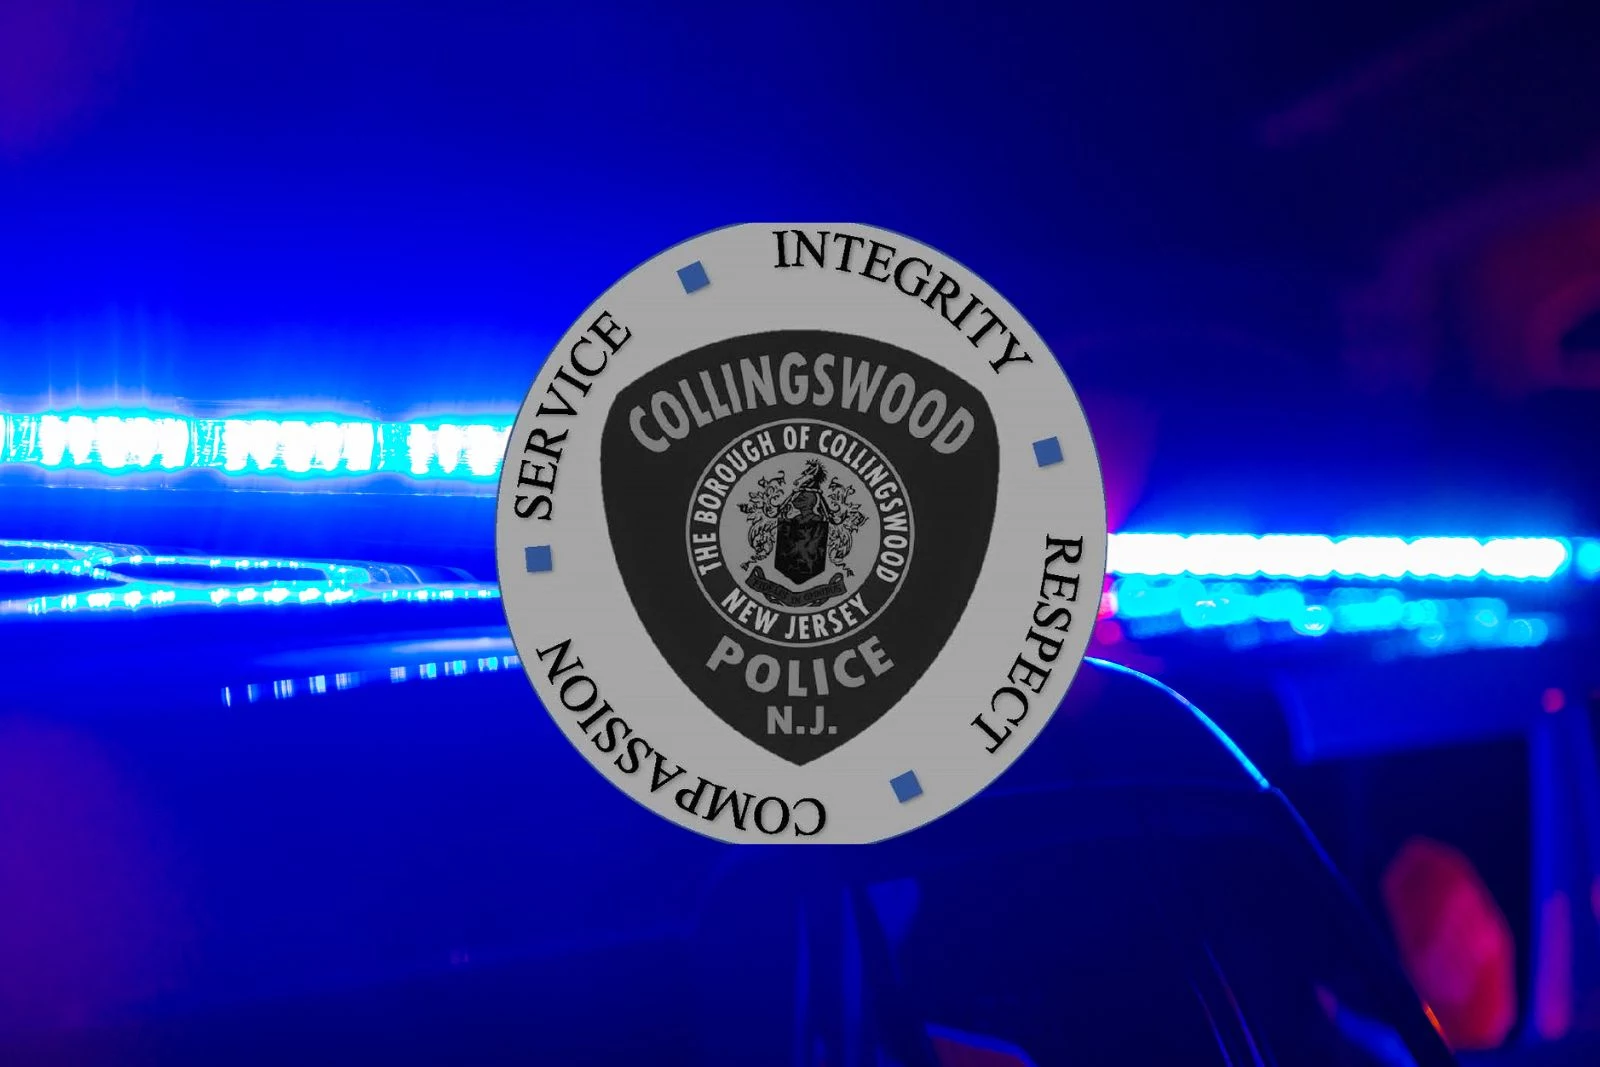 Collingswood Police Department